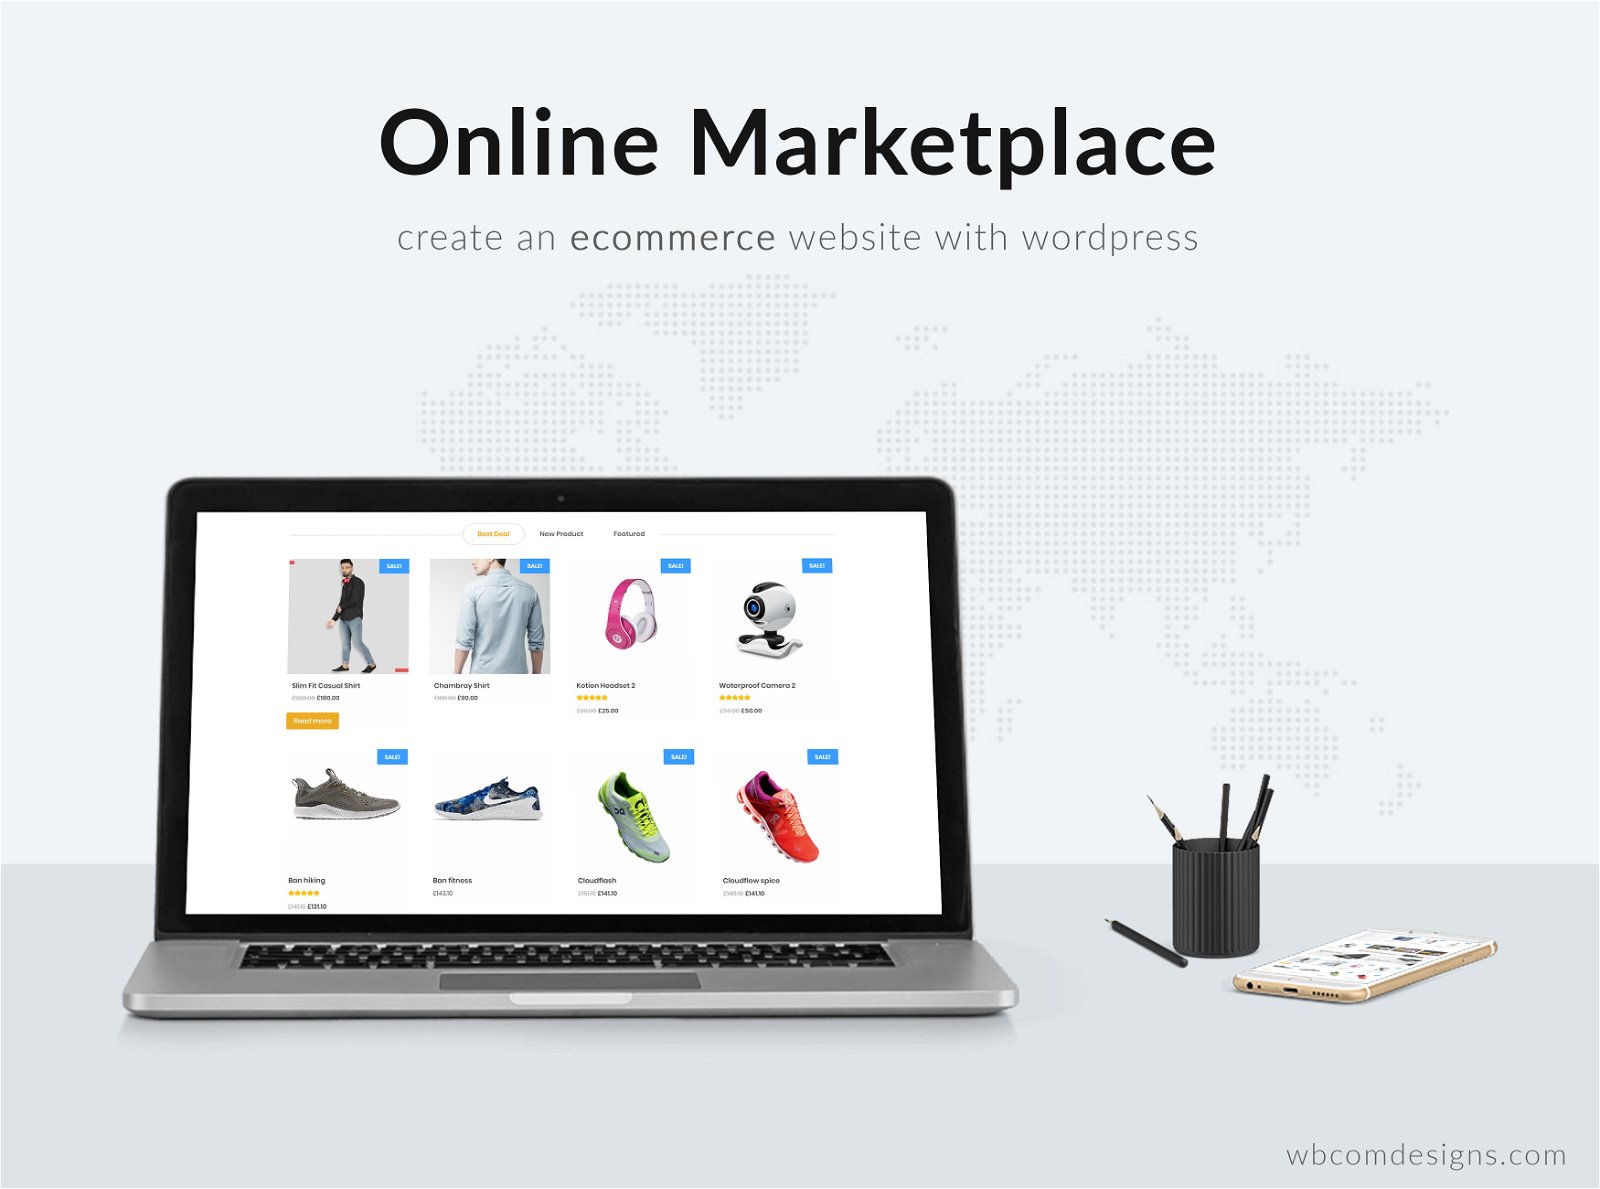 online marketplace- Sell Products Online